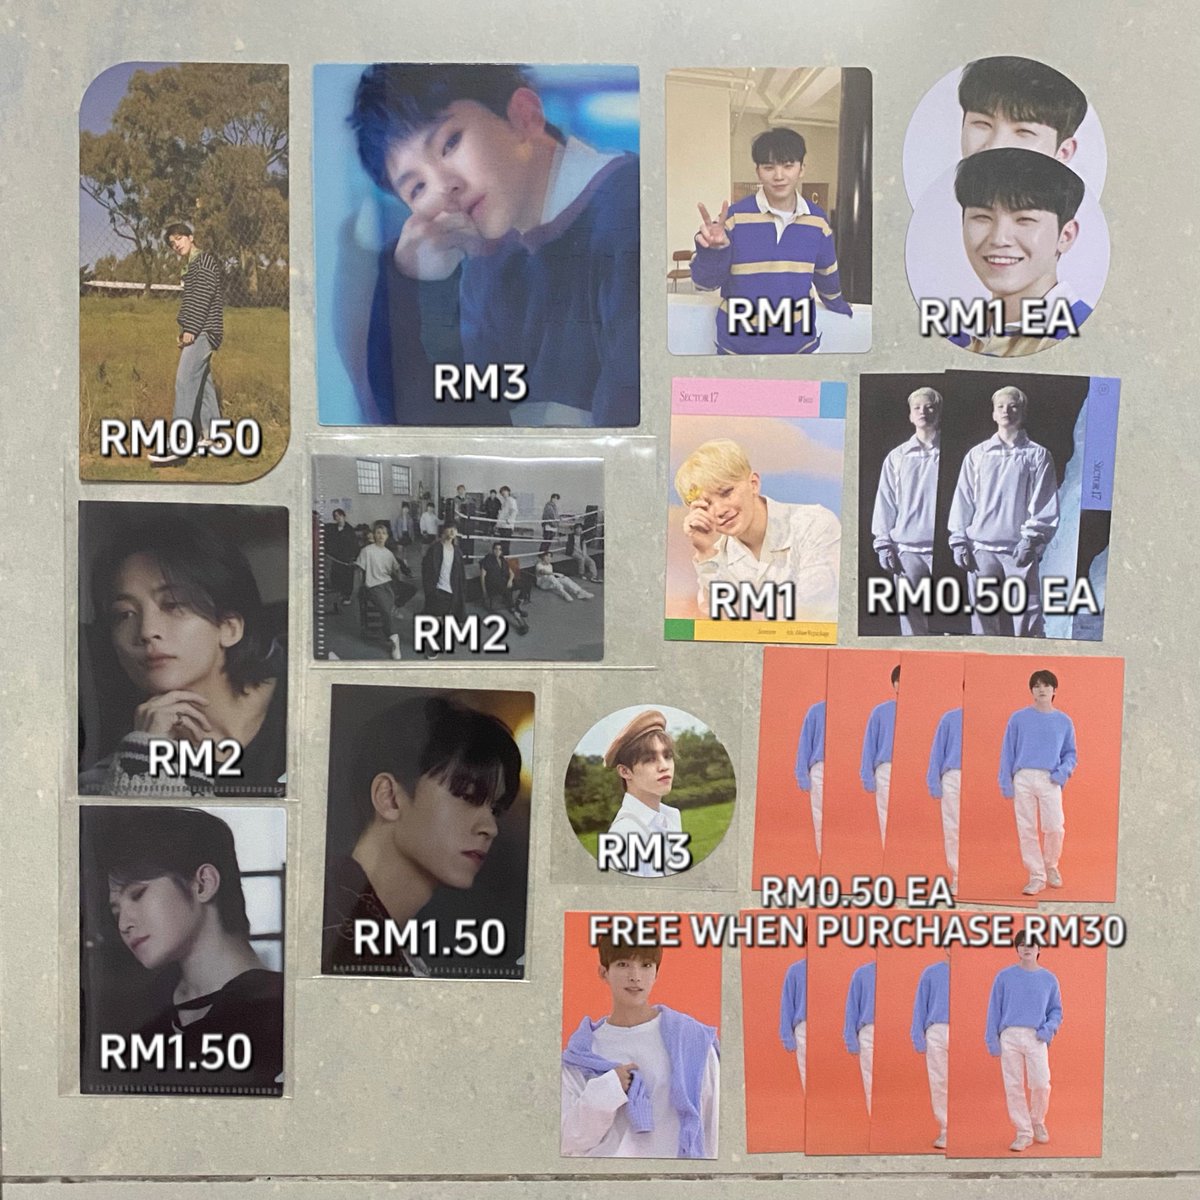 [ WTS | HELP RT ] 🇲🇾 SVT Album Inclusions & Official Merch 💰 Price stated exc postage 🚚 WM RM8 / EM RM9.50 👼🏻 Can meet-up during #dreamofYOON 🙅🏻‍♀️ No reservations. FCFS. DM to purchase 💌 #pasarseventeen #pasarsvt